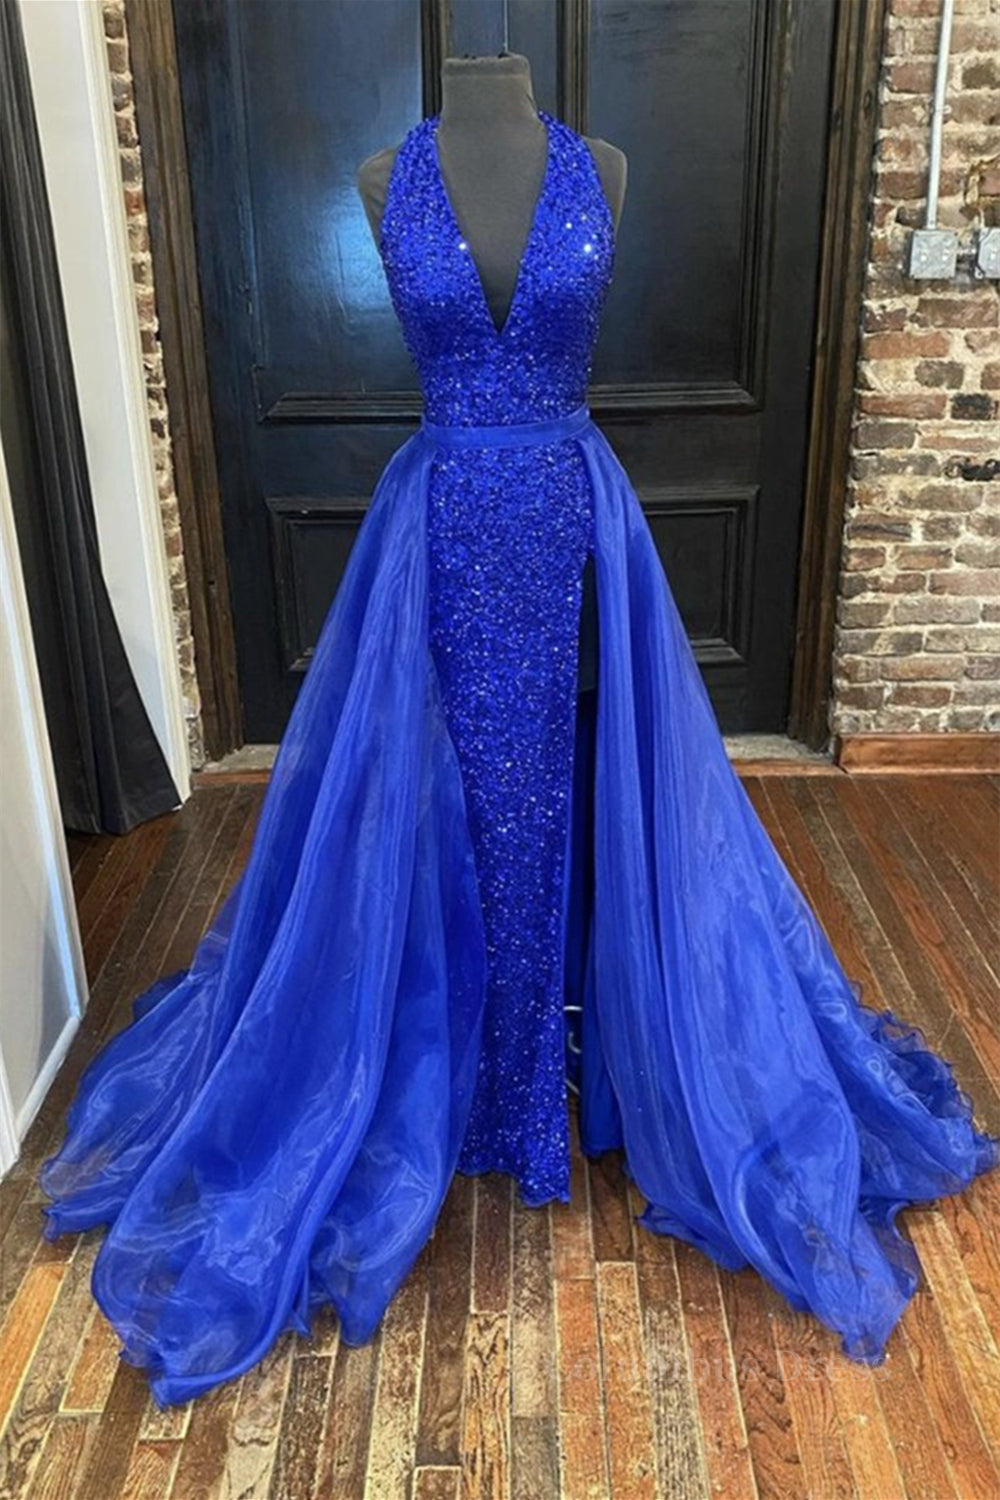 Gorgeous V Neck Mermaid Blue Sequins Long Corset Prom Dress, Mermaid Blue Corset Formal Dress, Blue Evening Dress outfit, Homecoming Dress Websites